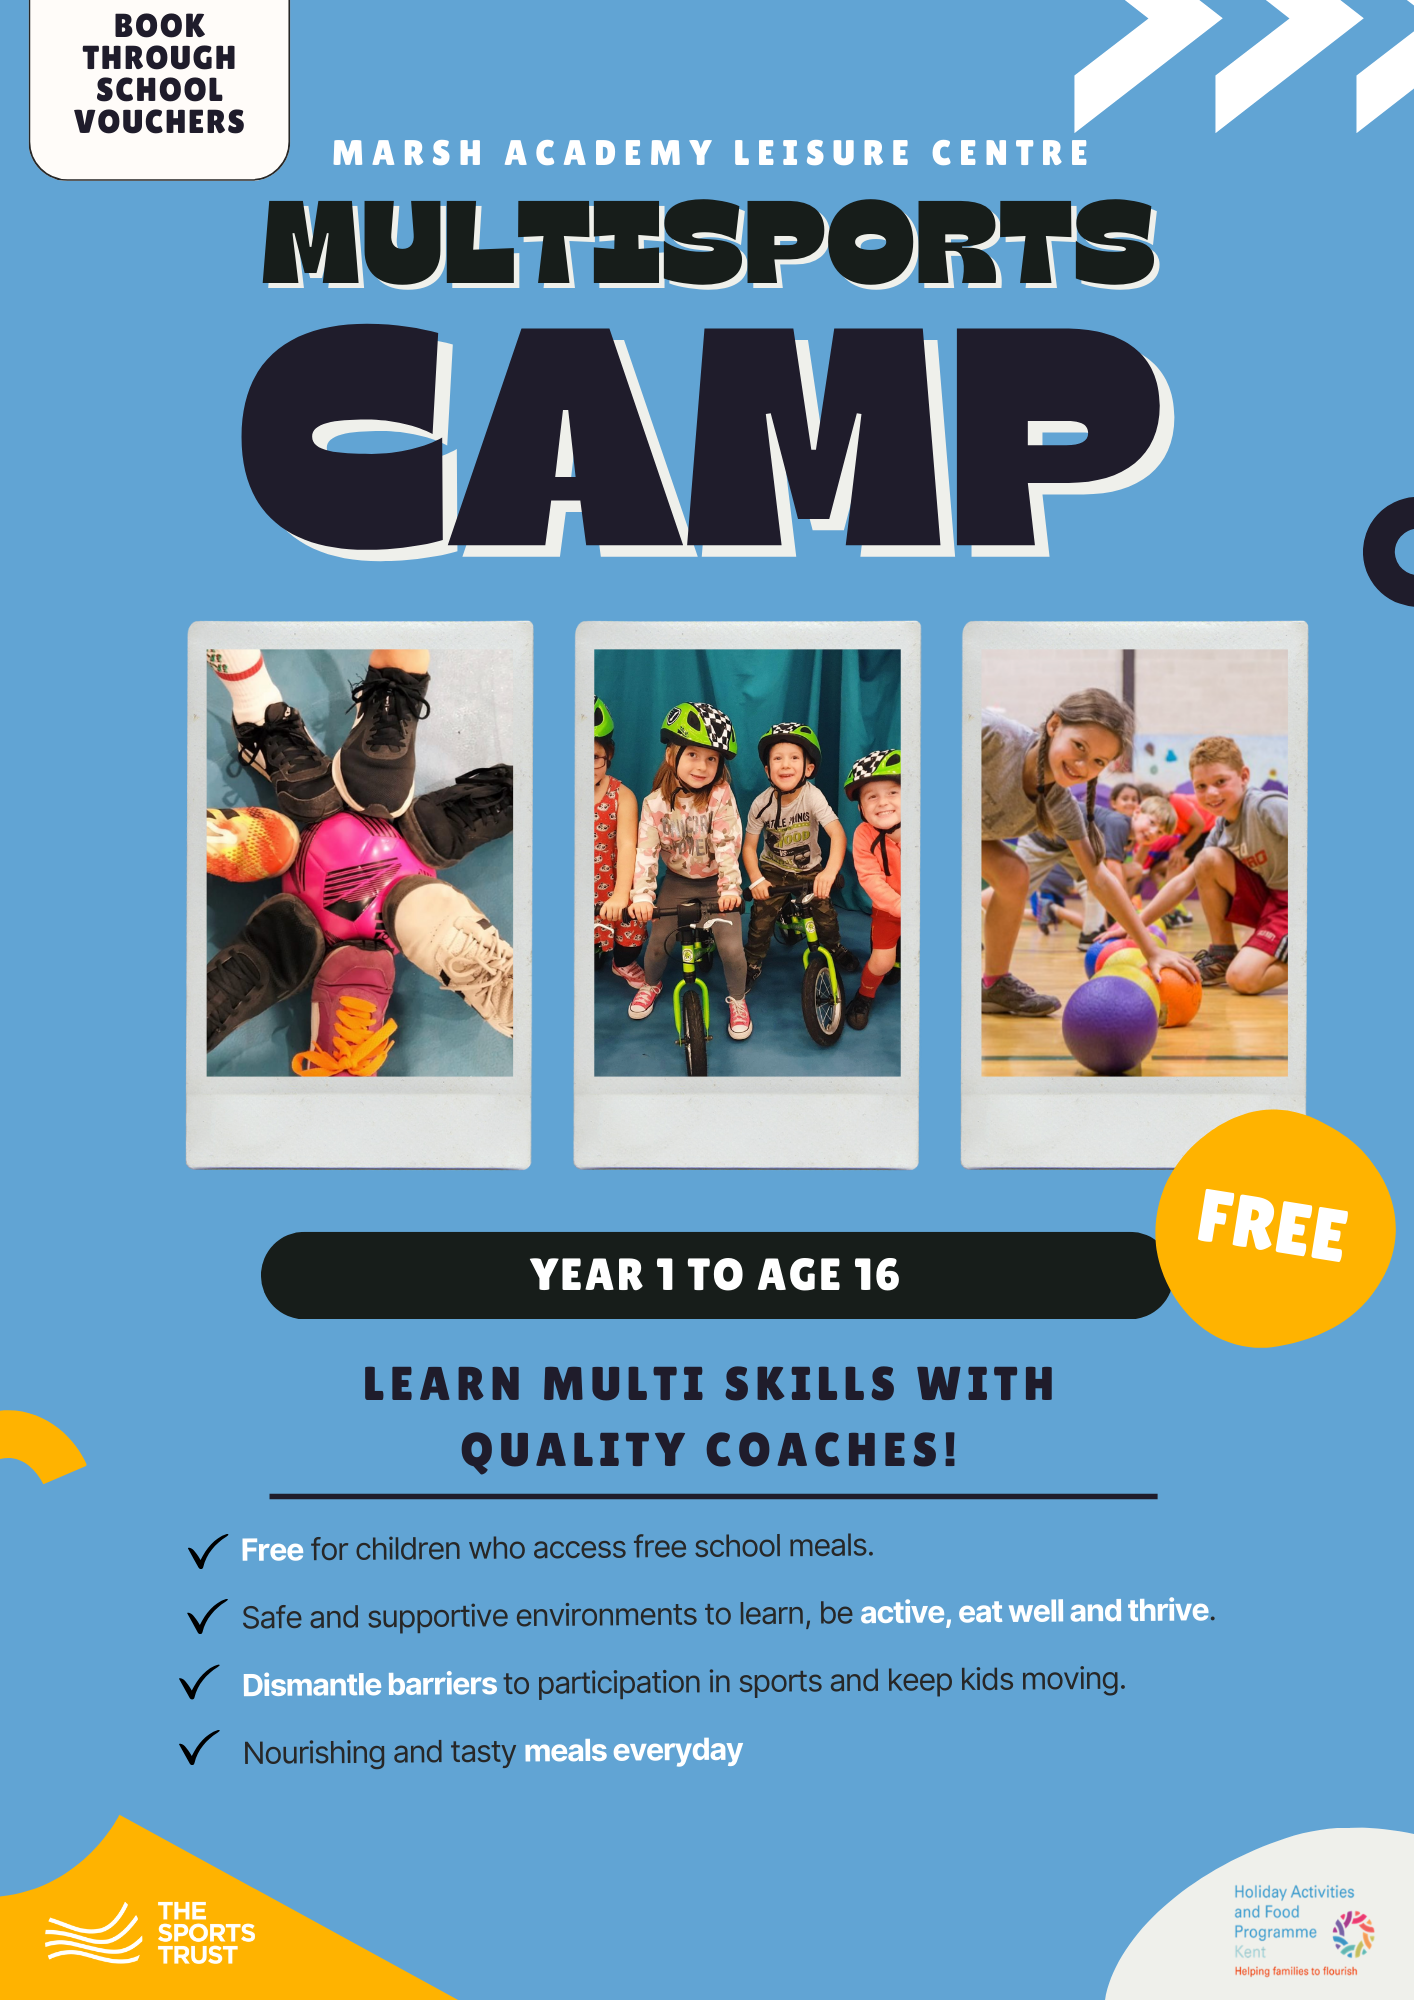 The Sports Trust - Holiday Camps